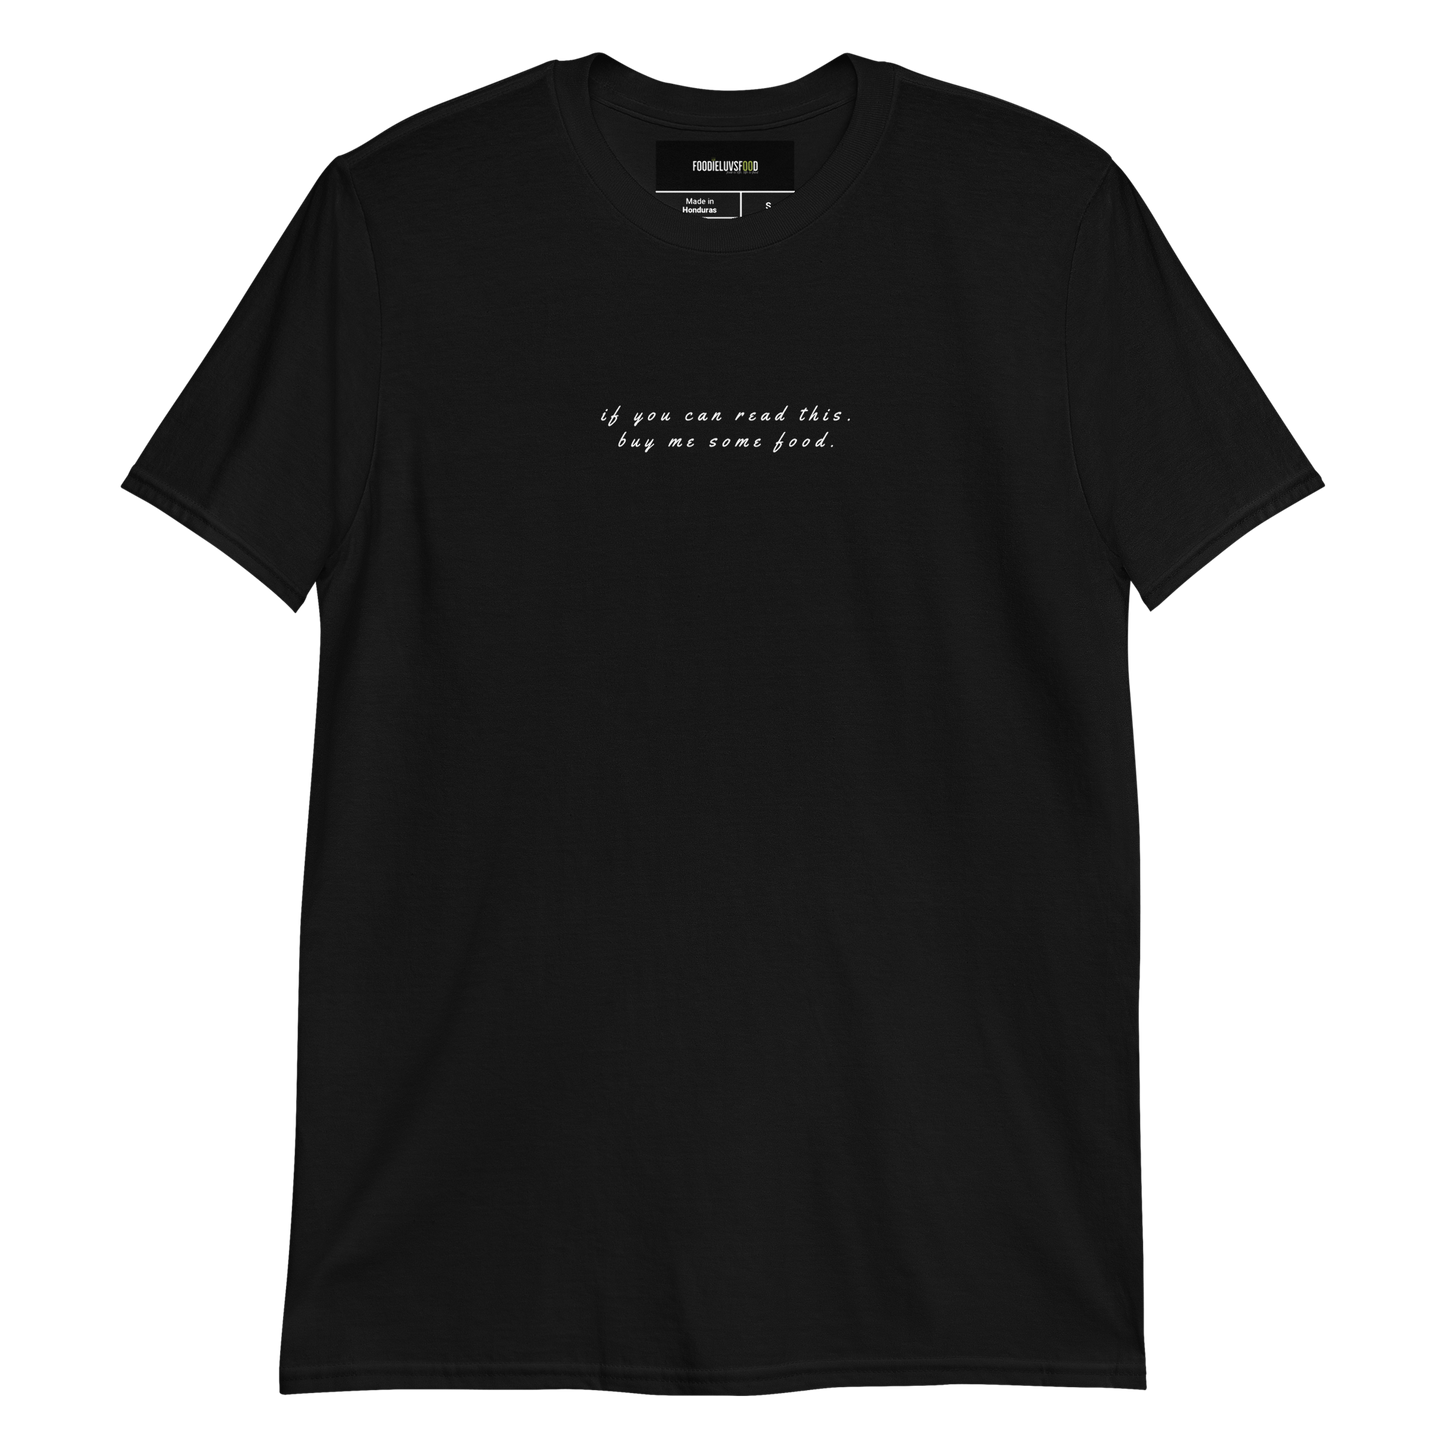 “If You Can Read This” Unisex Comfy T-Shirt